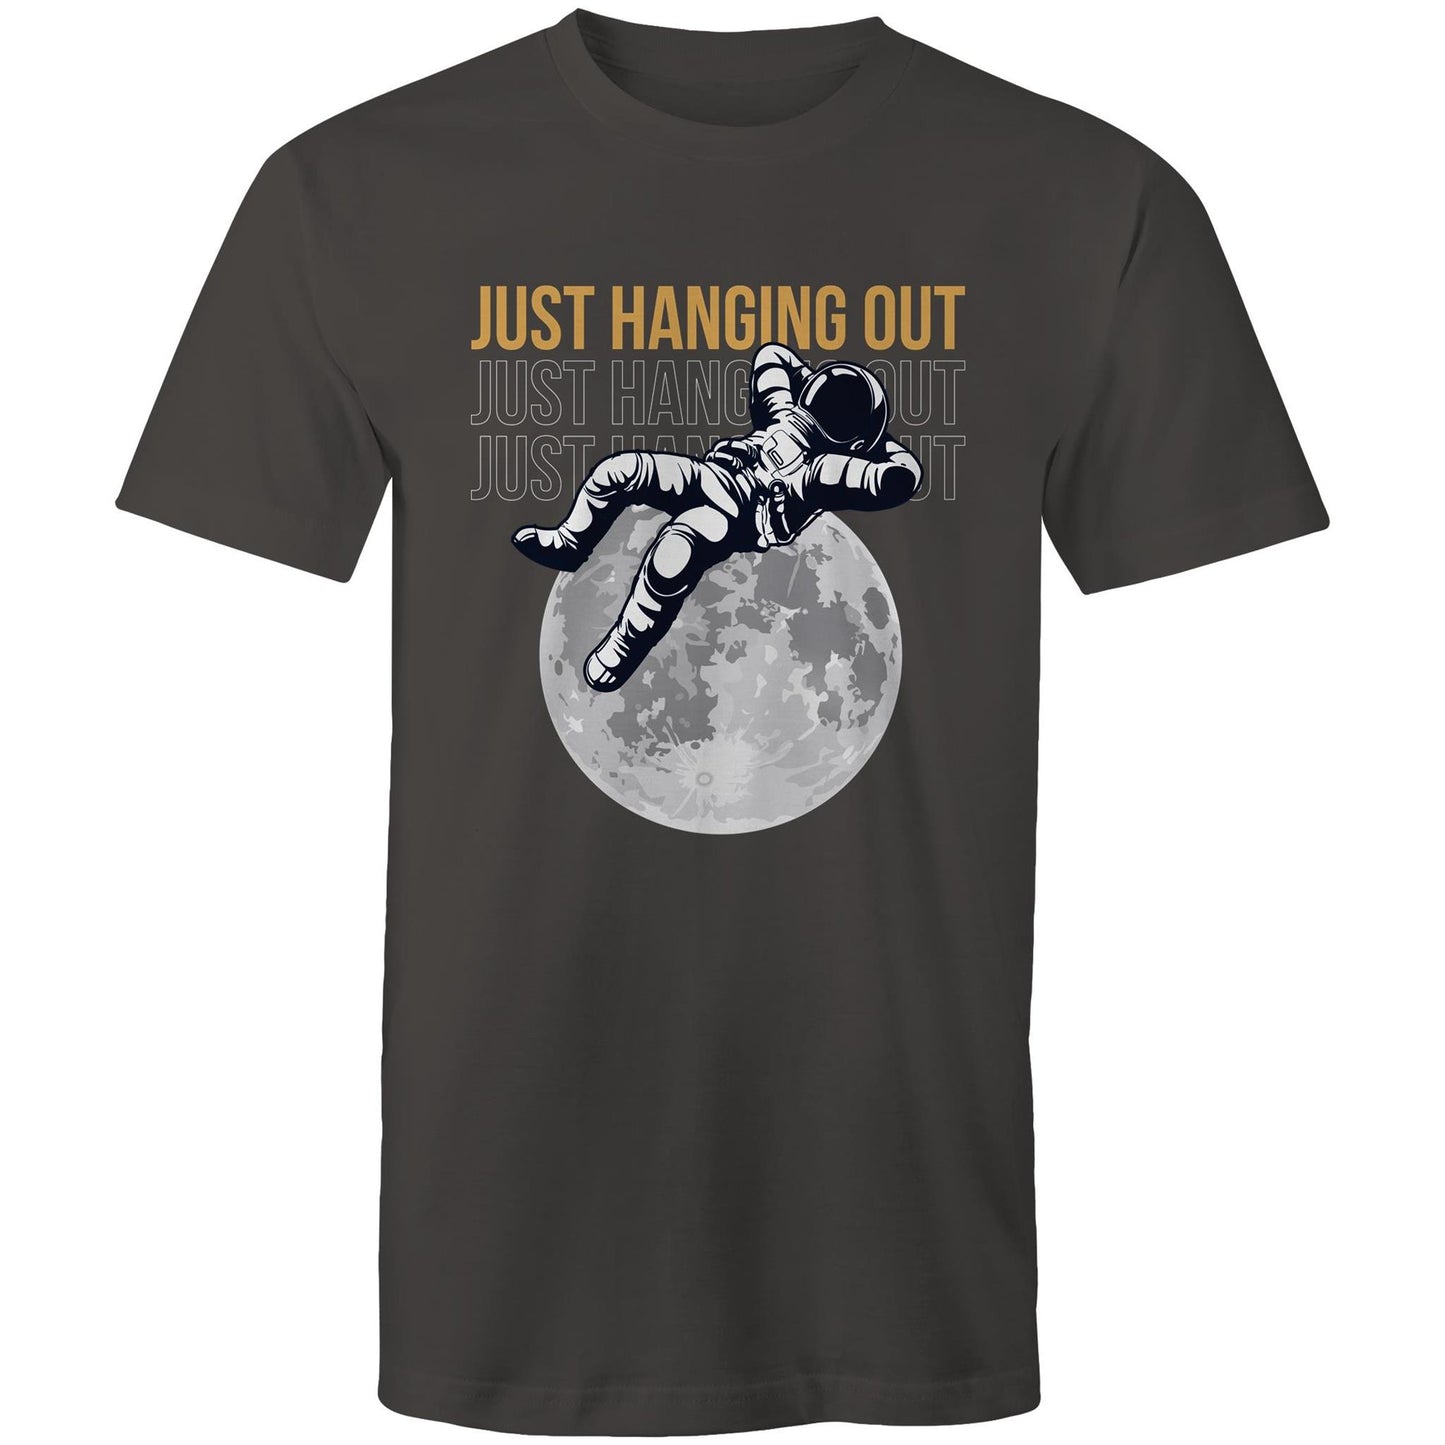 Just Hanging Out - Mens T-Shirt Charcoal Mens T-shirt Space